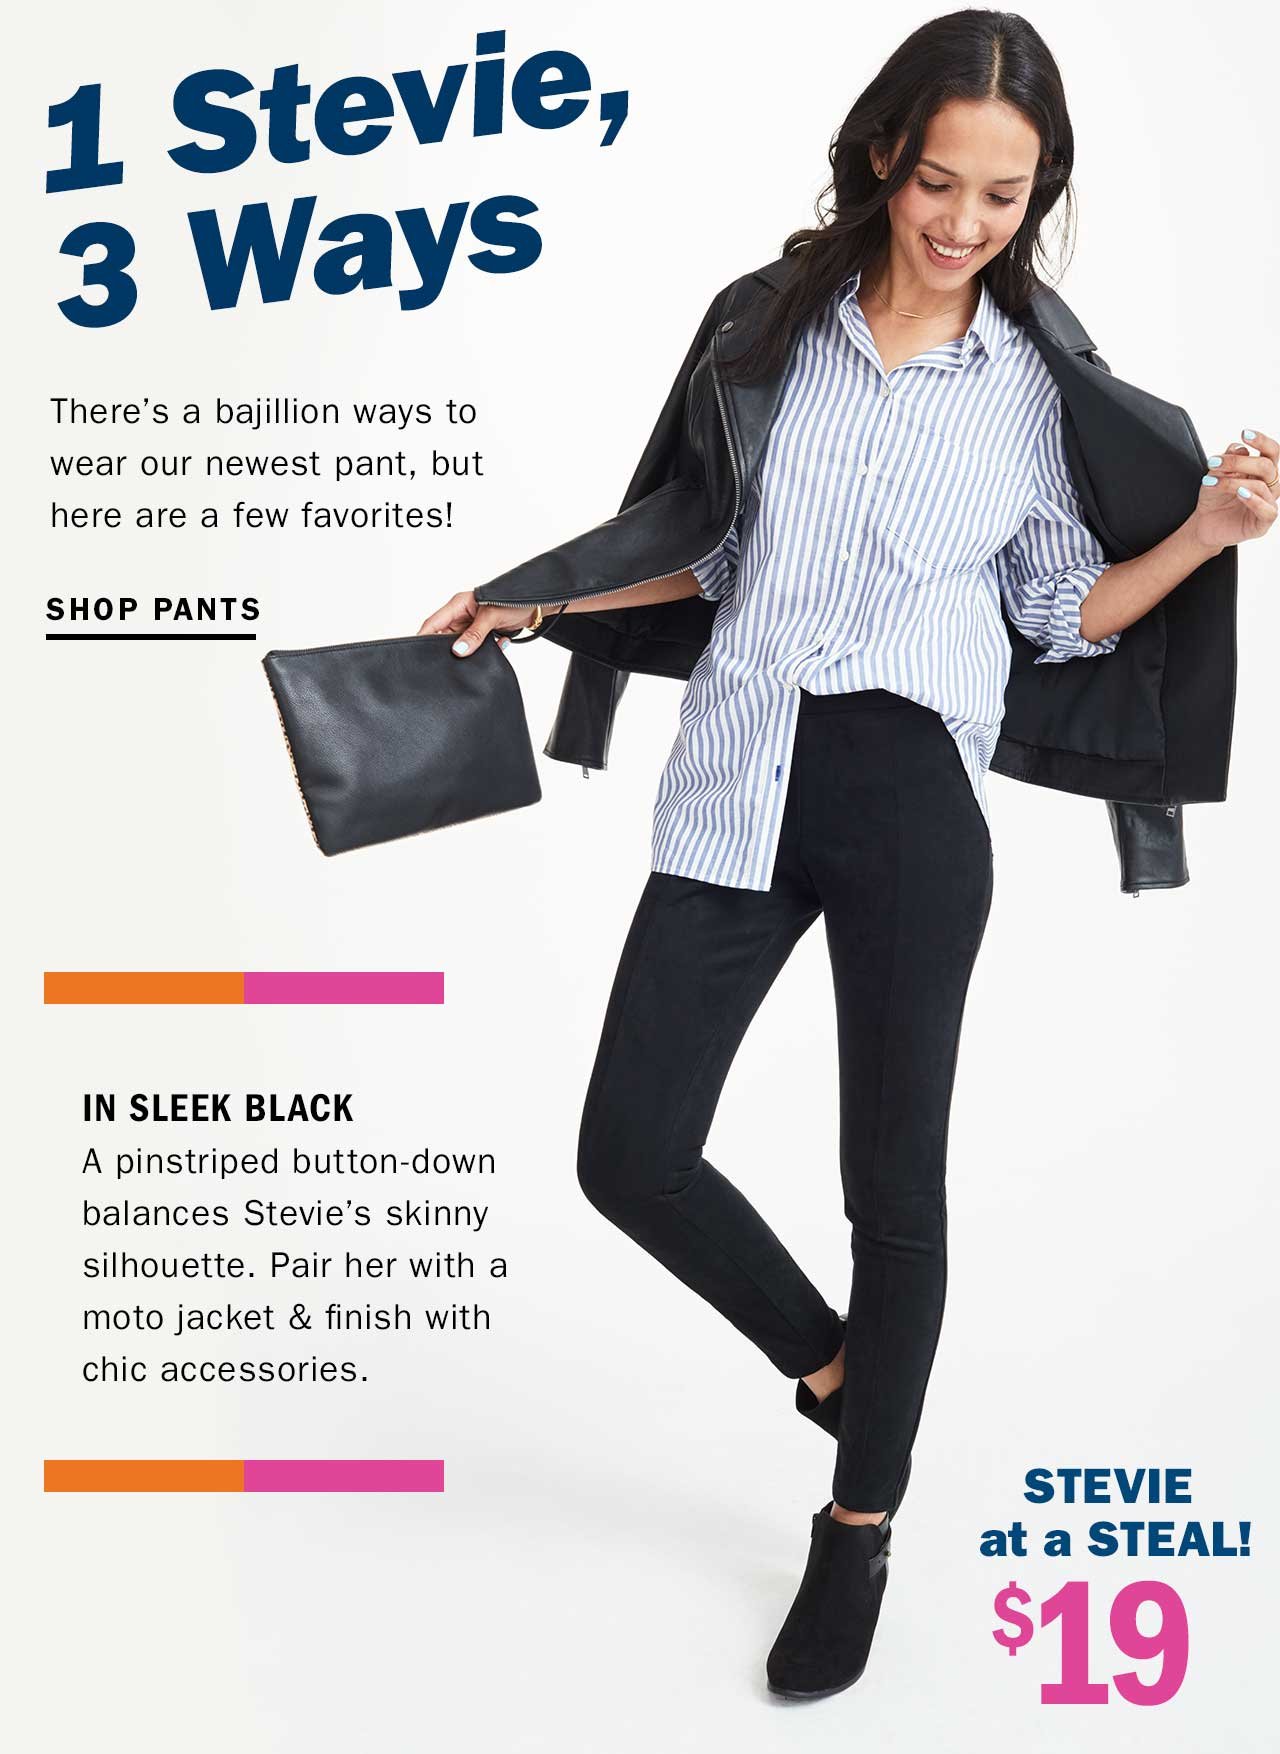 Old Navy: 🔵 3 ways to wear Stevie, our #1 fall pant